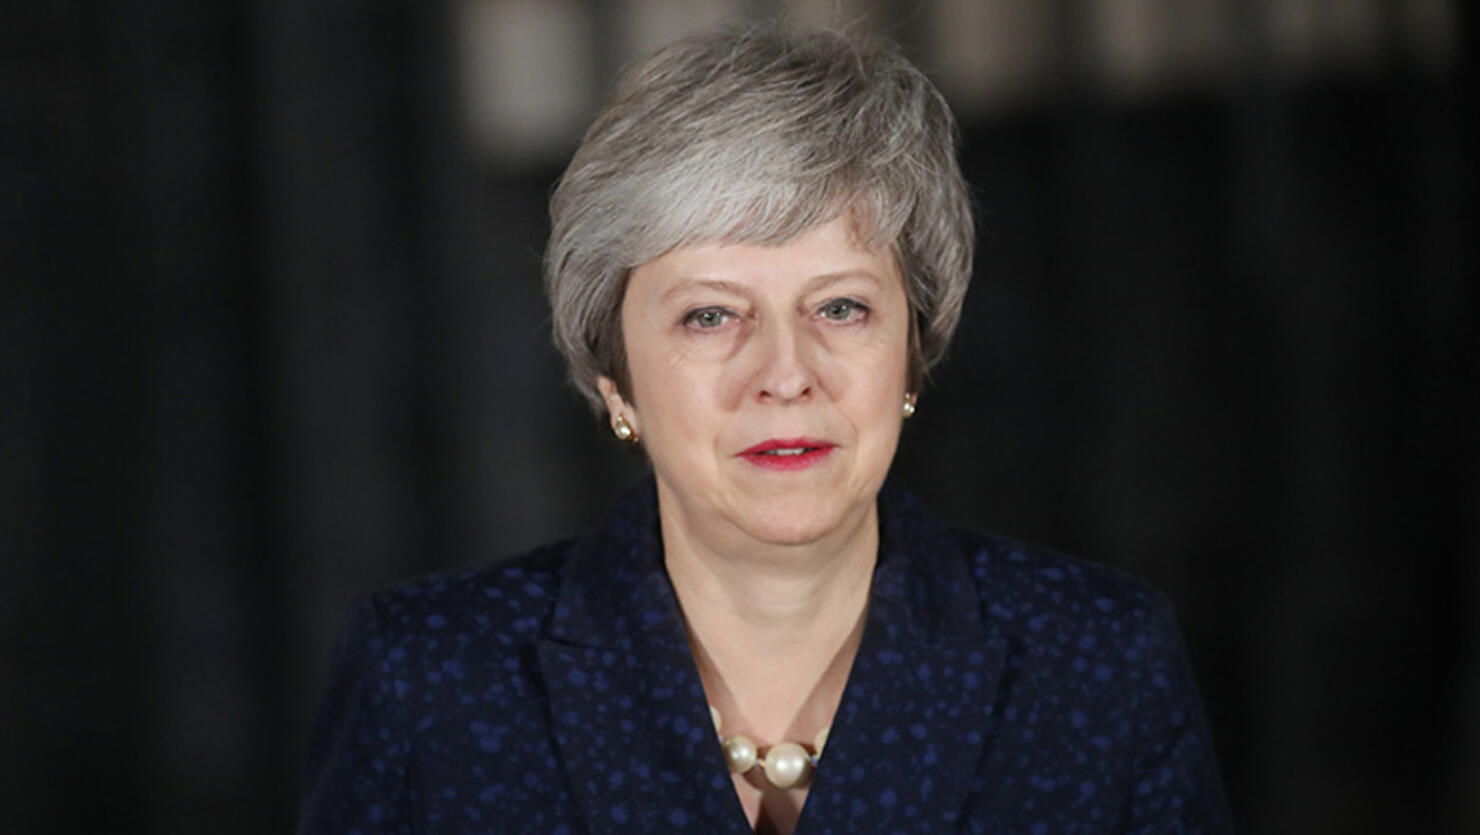 Prime Minister Theresa May makes a statement in 10 Downing Street, London, after she survived an attempt by Tory MPs to oust her as party leader with a vote of no confidence.